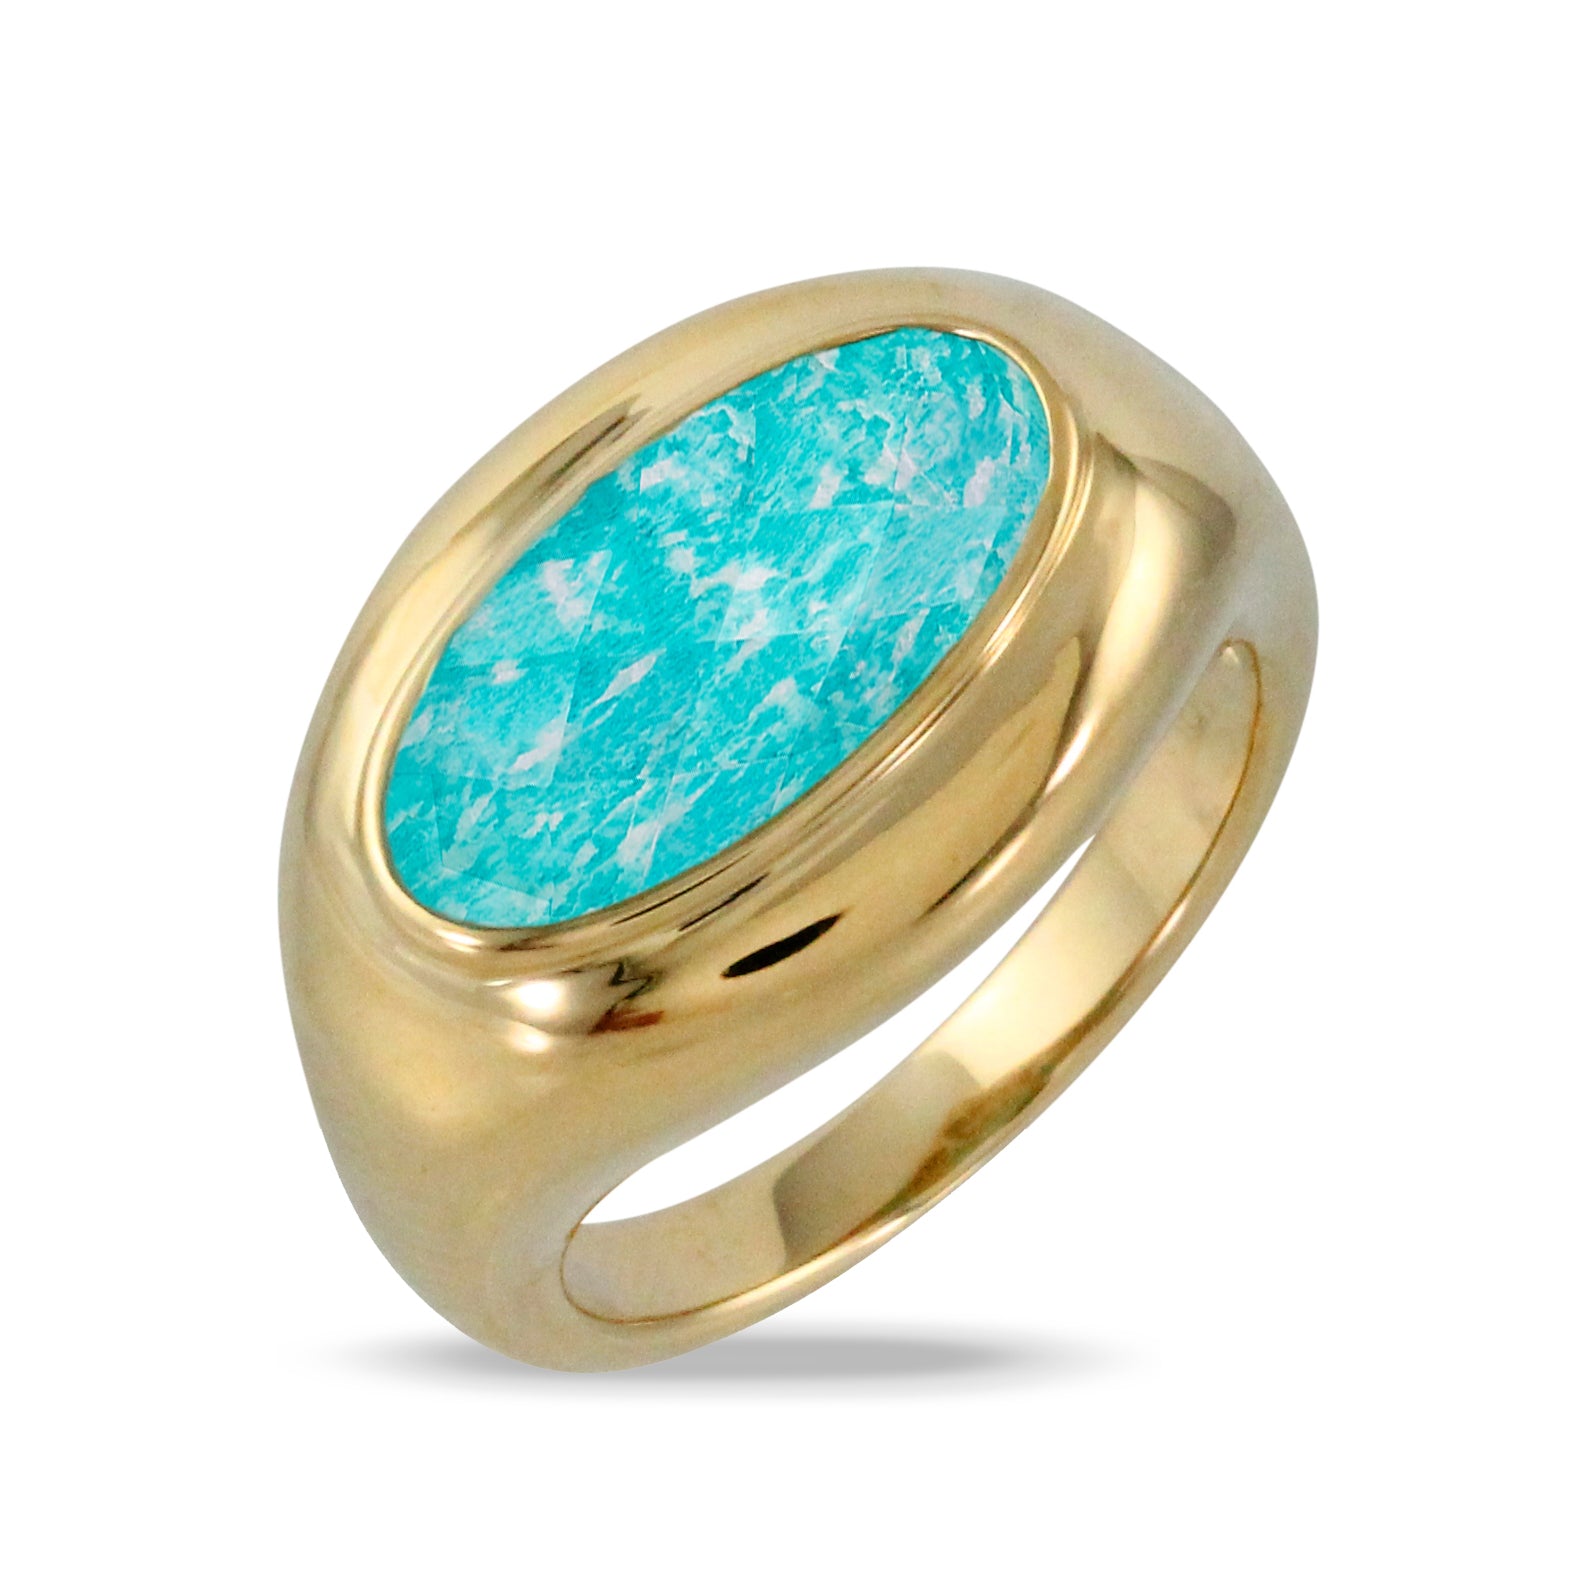 18K YELLOW GOLD RING WITH CLEAR QUARTZ OVER AMAZONITE